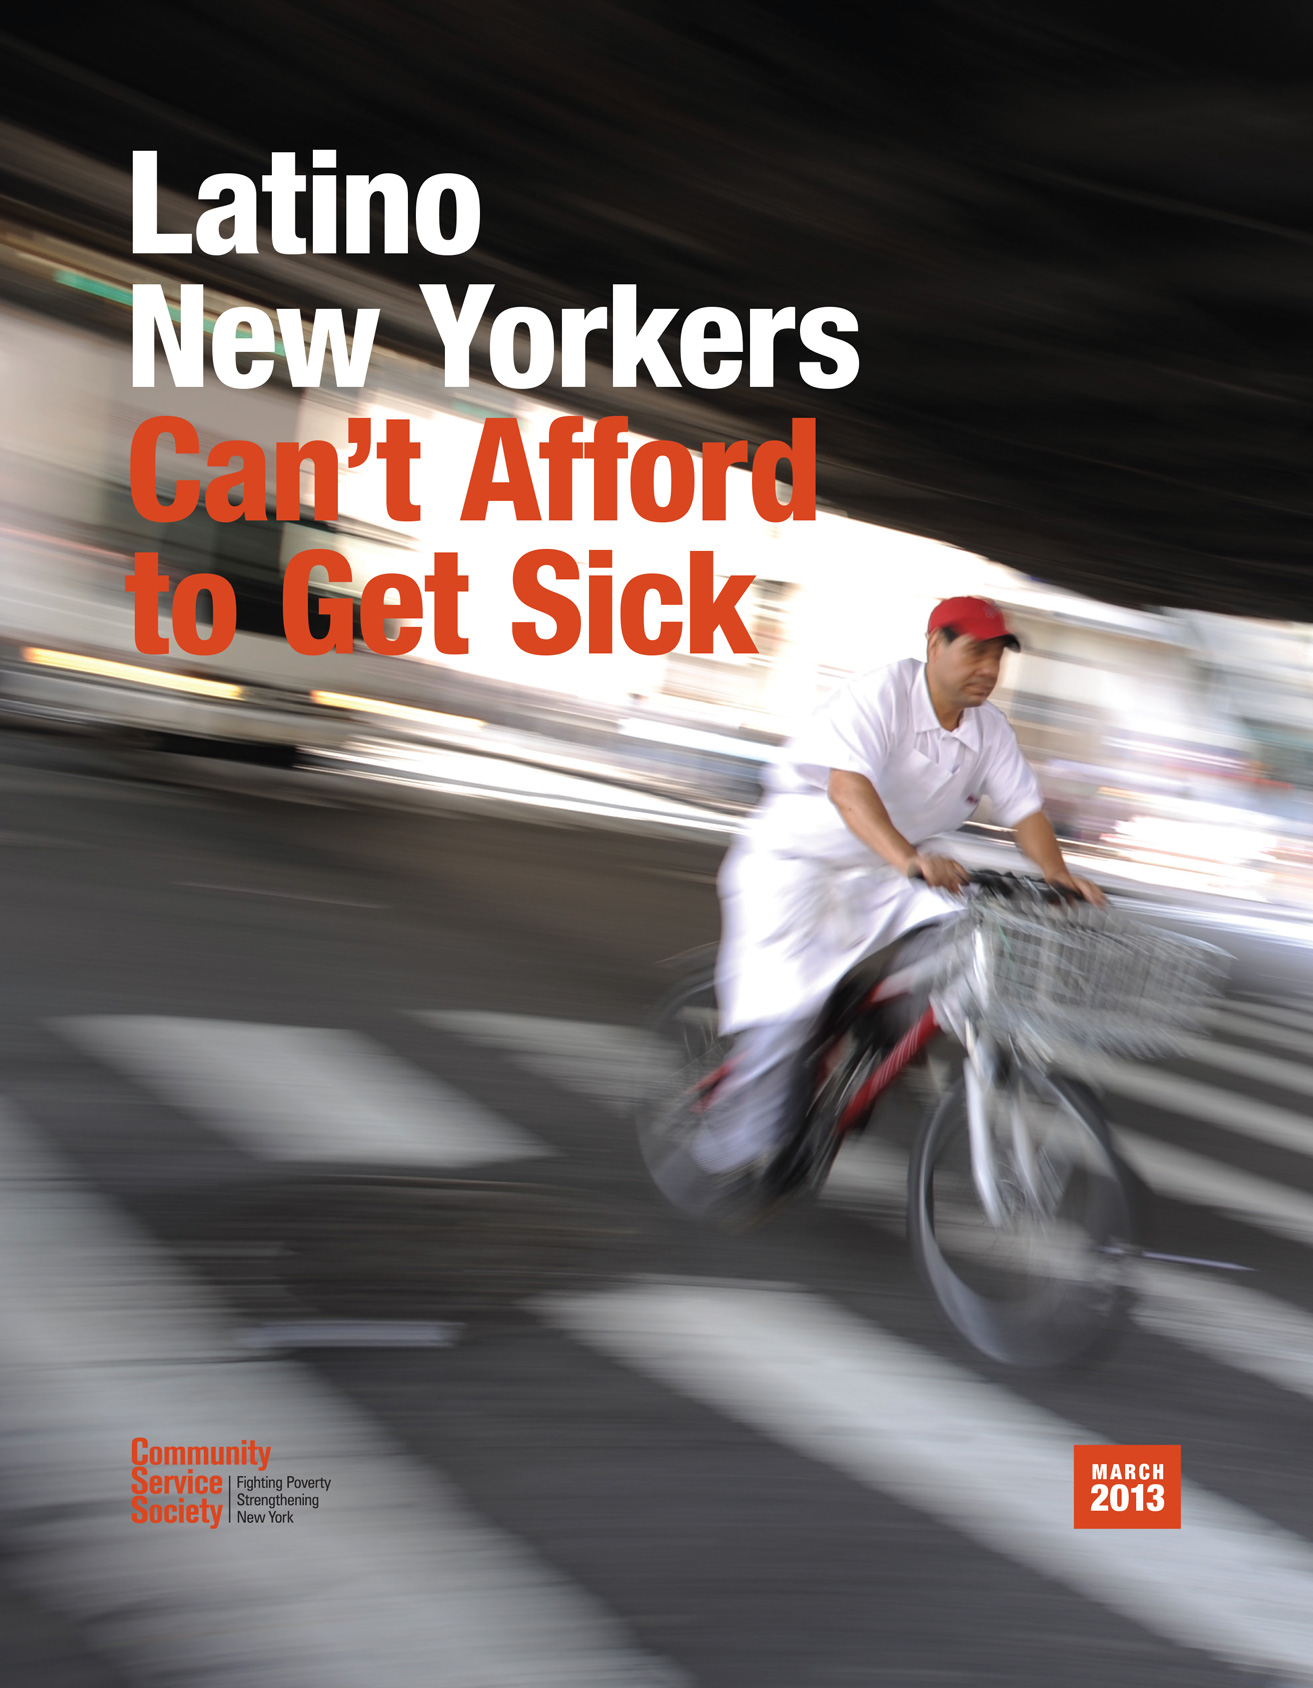 Latino New Yorkers Can’t Afford to Get Sick